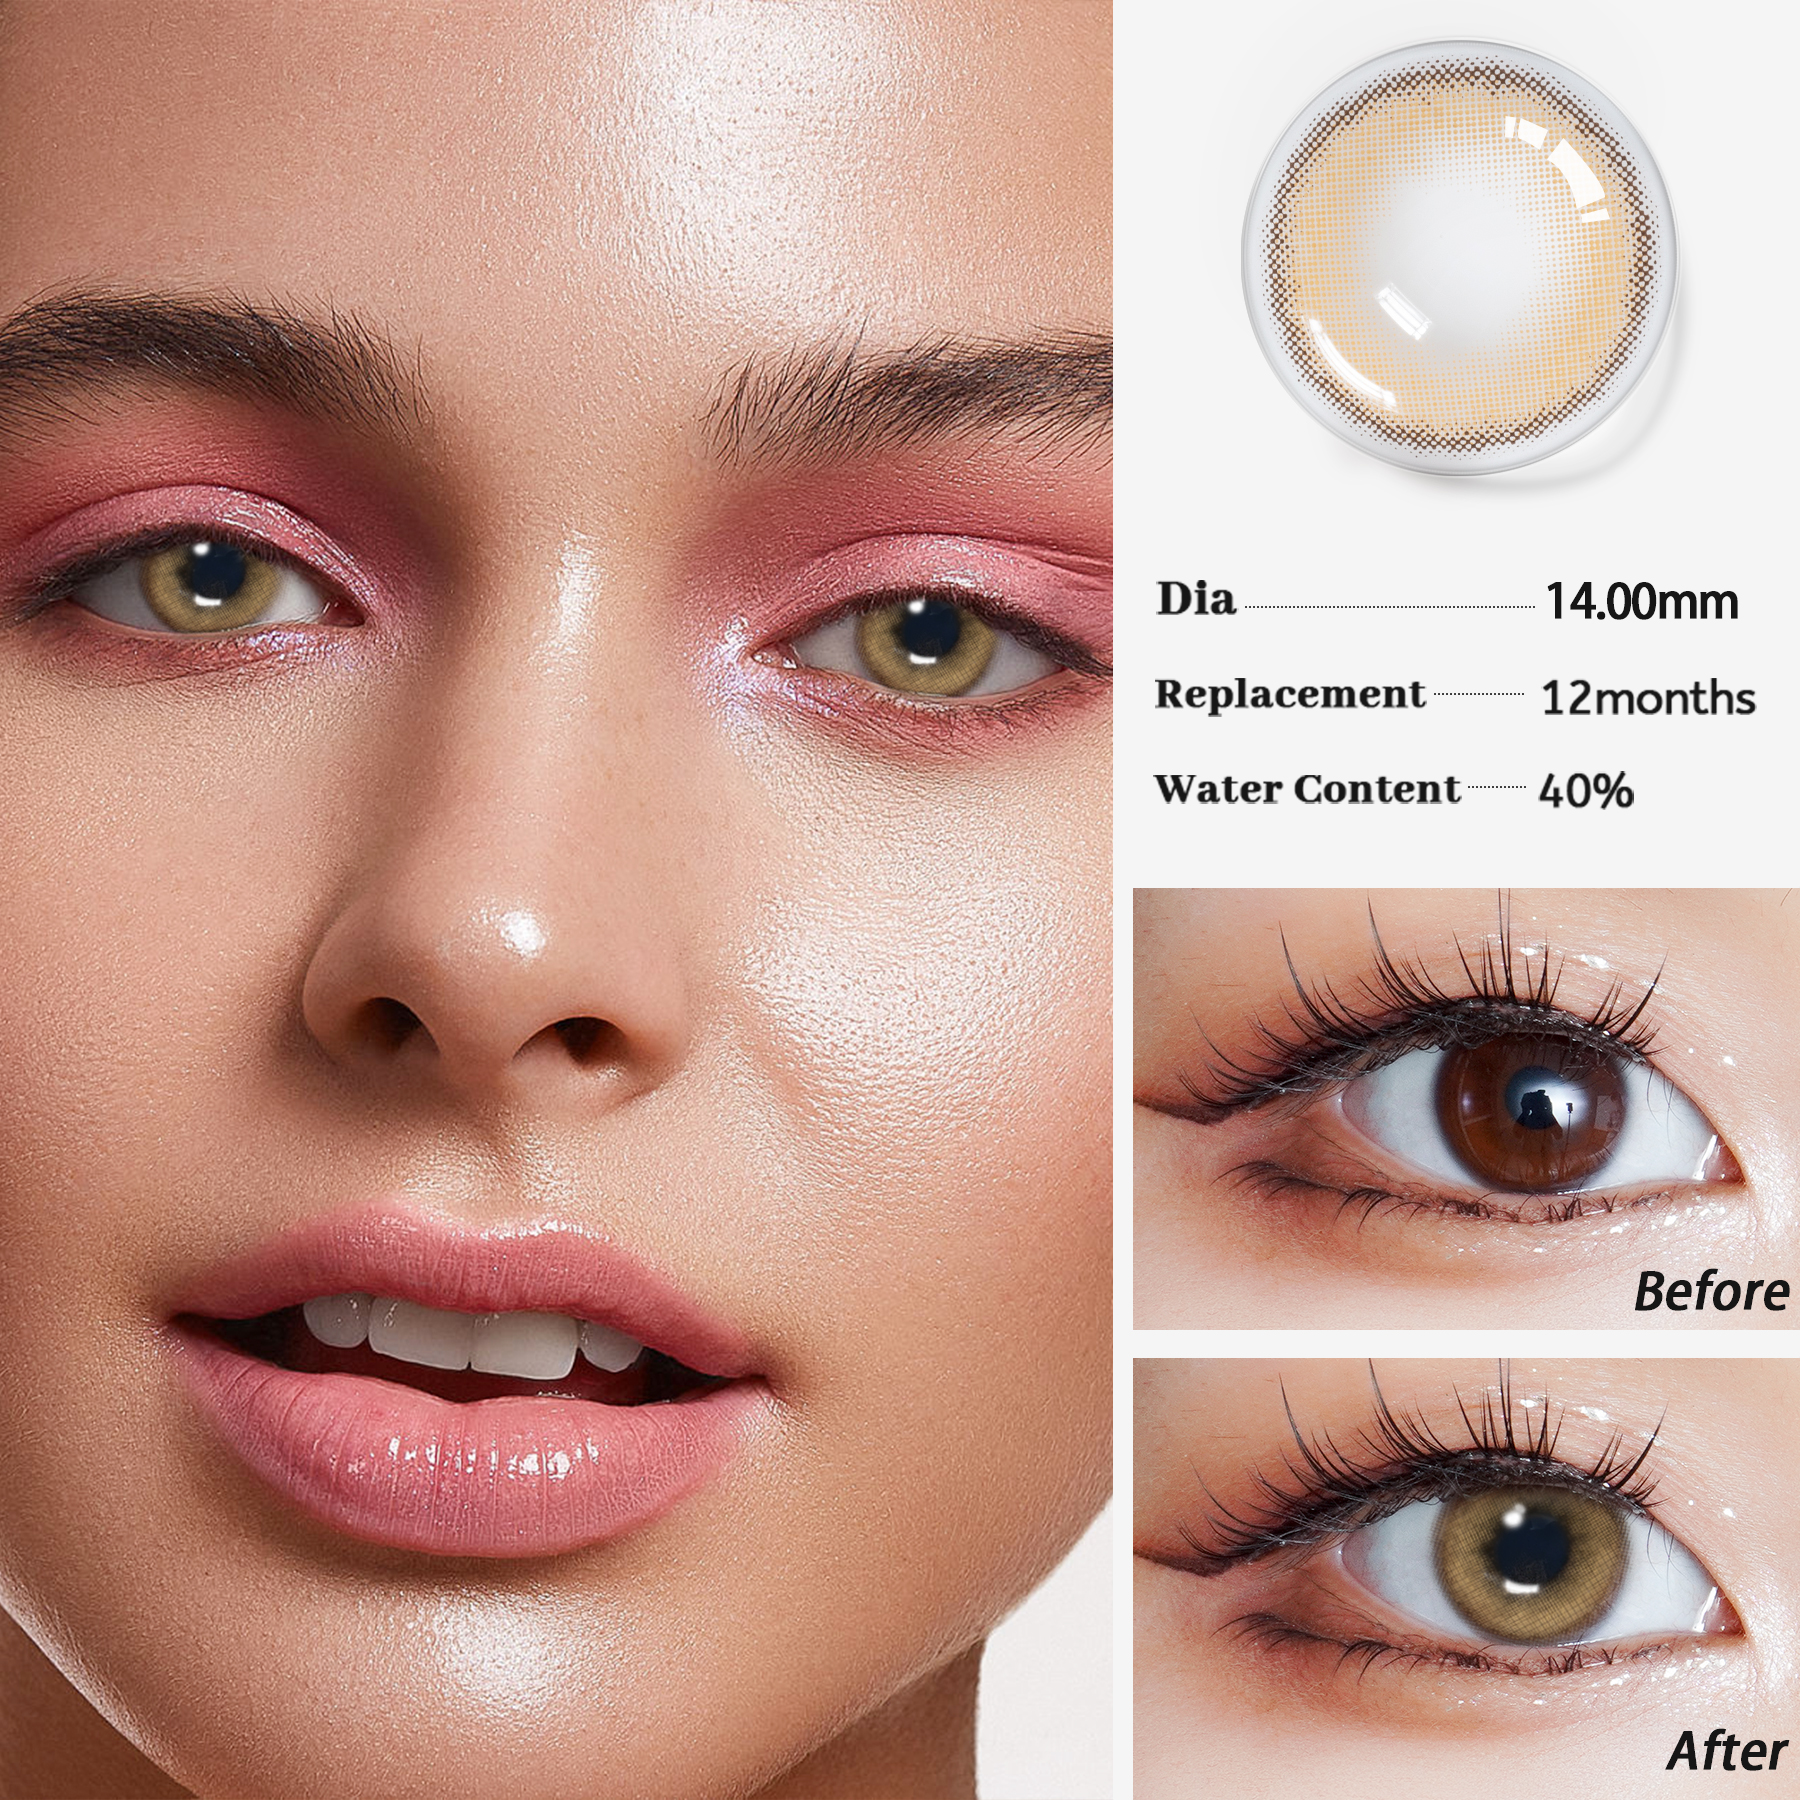 RAINBOW Colored Contacts lentes Free Sample Magic Color Contact Lenses Big Eye Circle Cosmetic Contact Lens